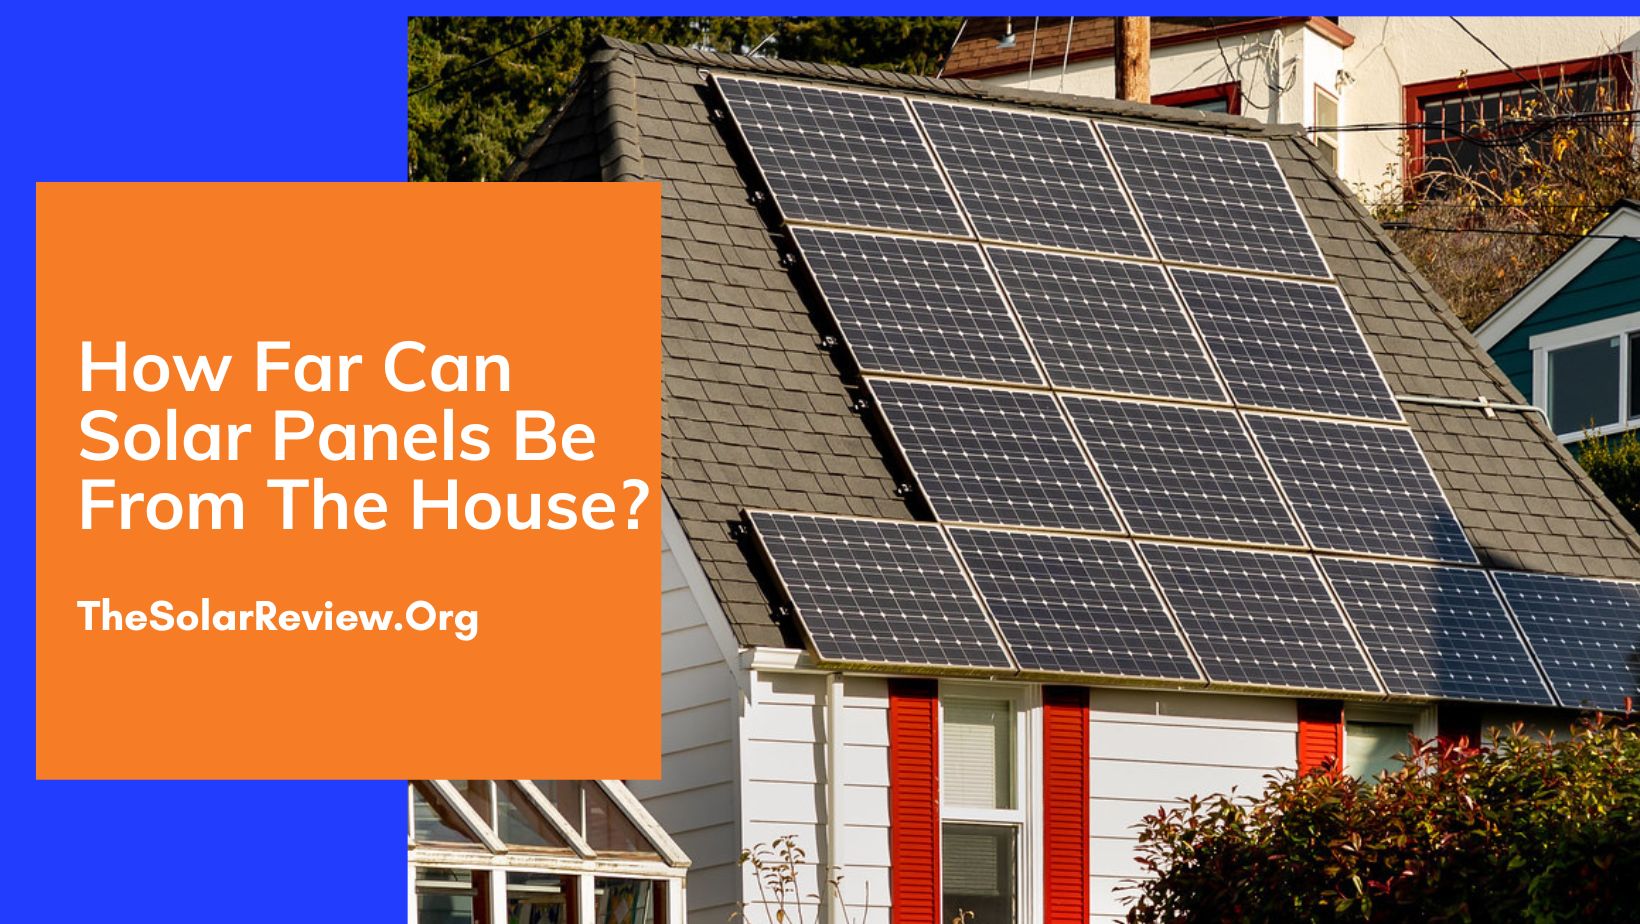 How Far Can Solar Panels Be From The House?